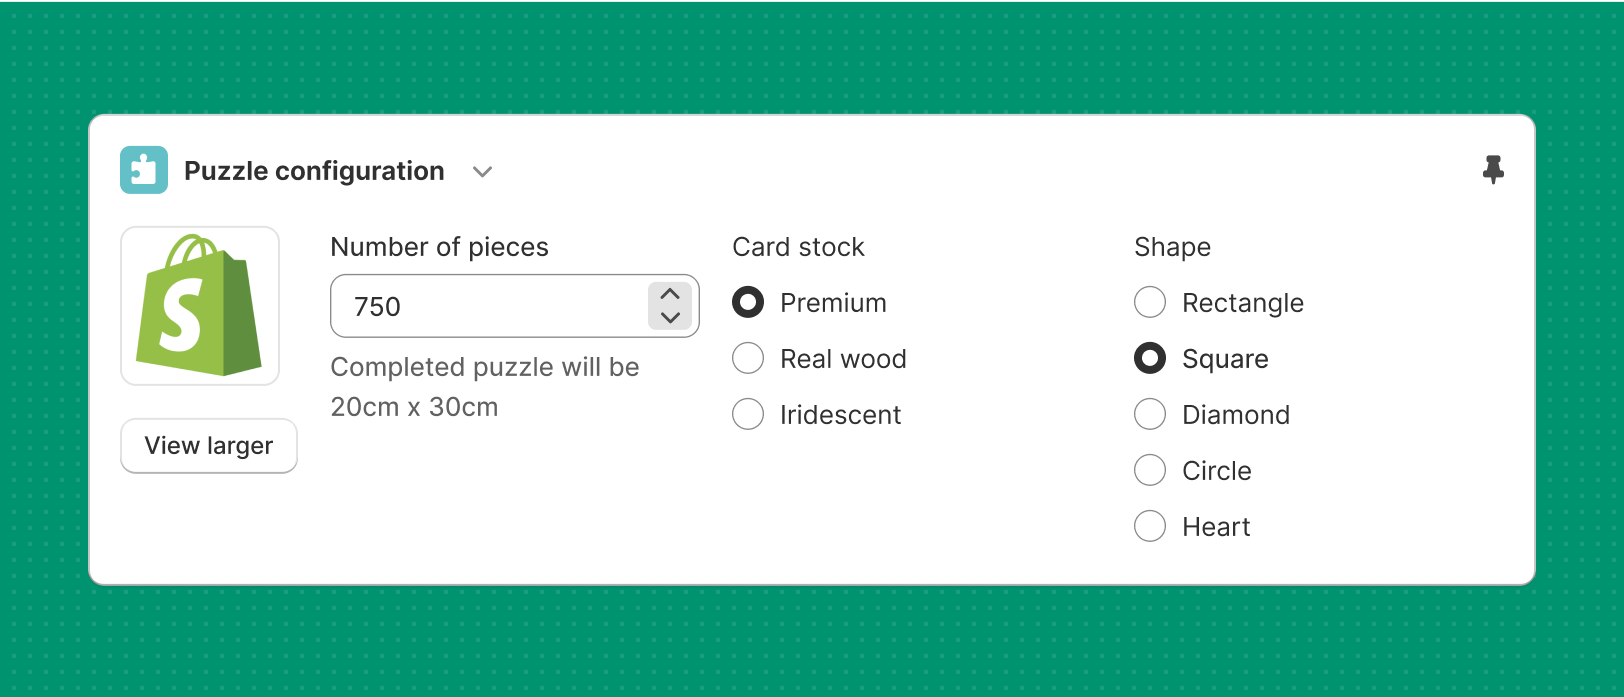 A simple form with several input fields.